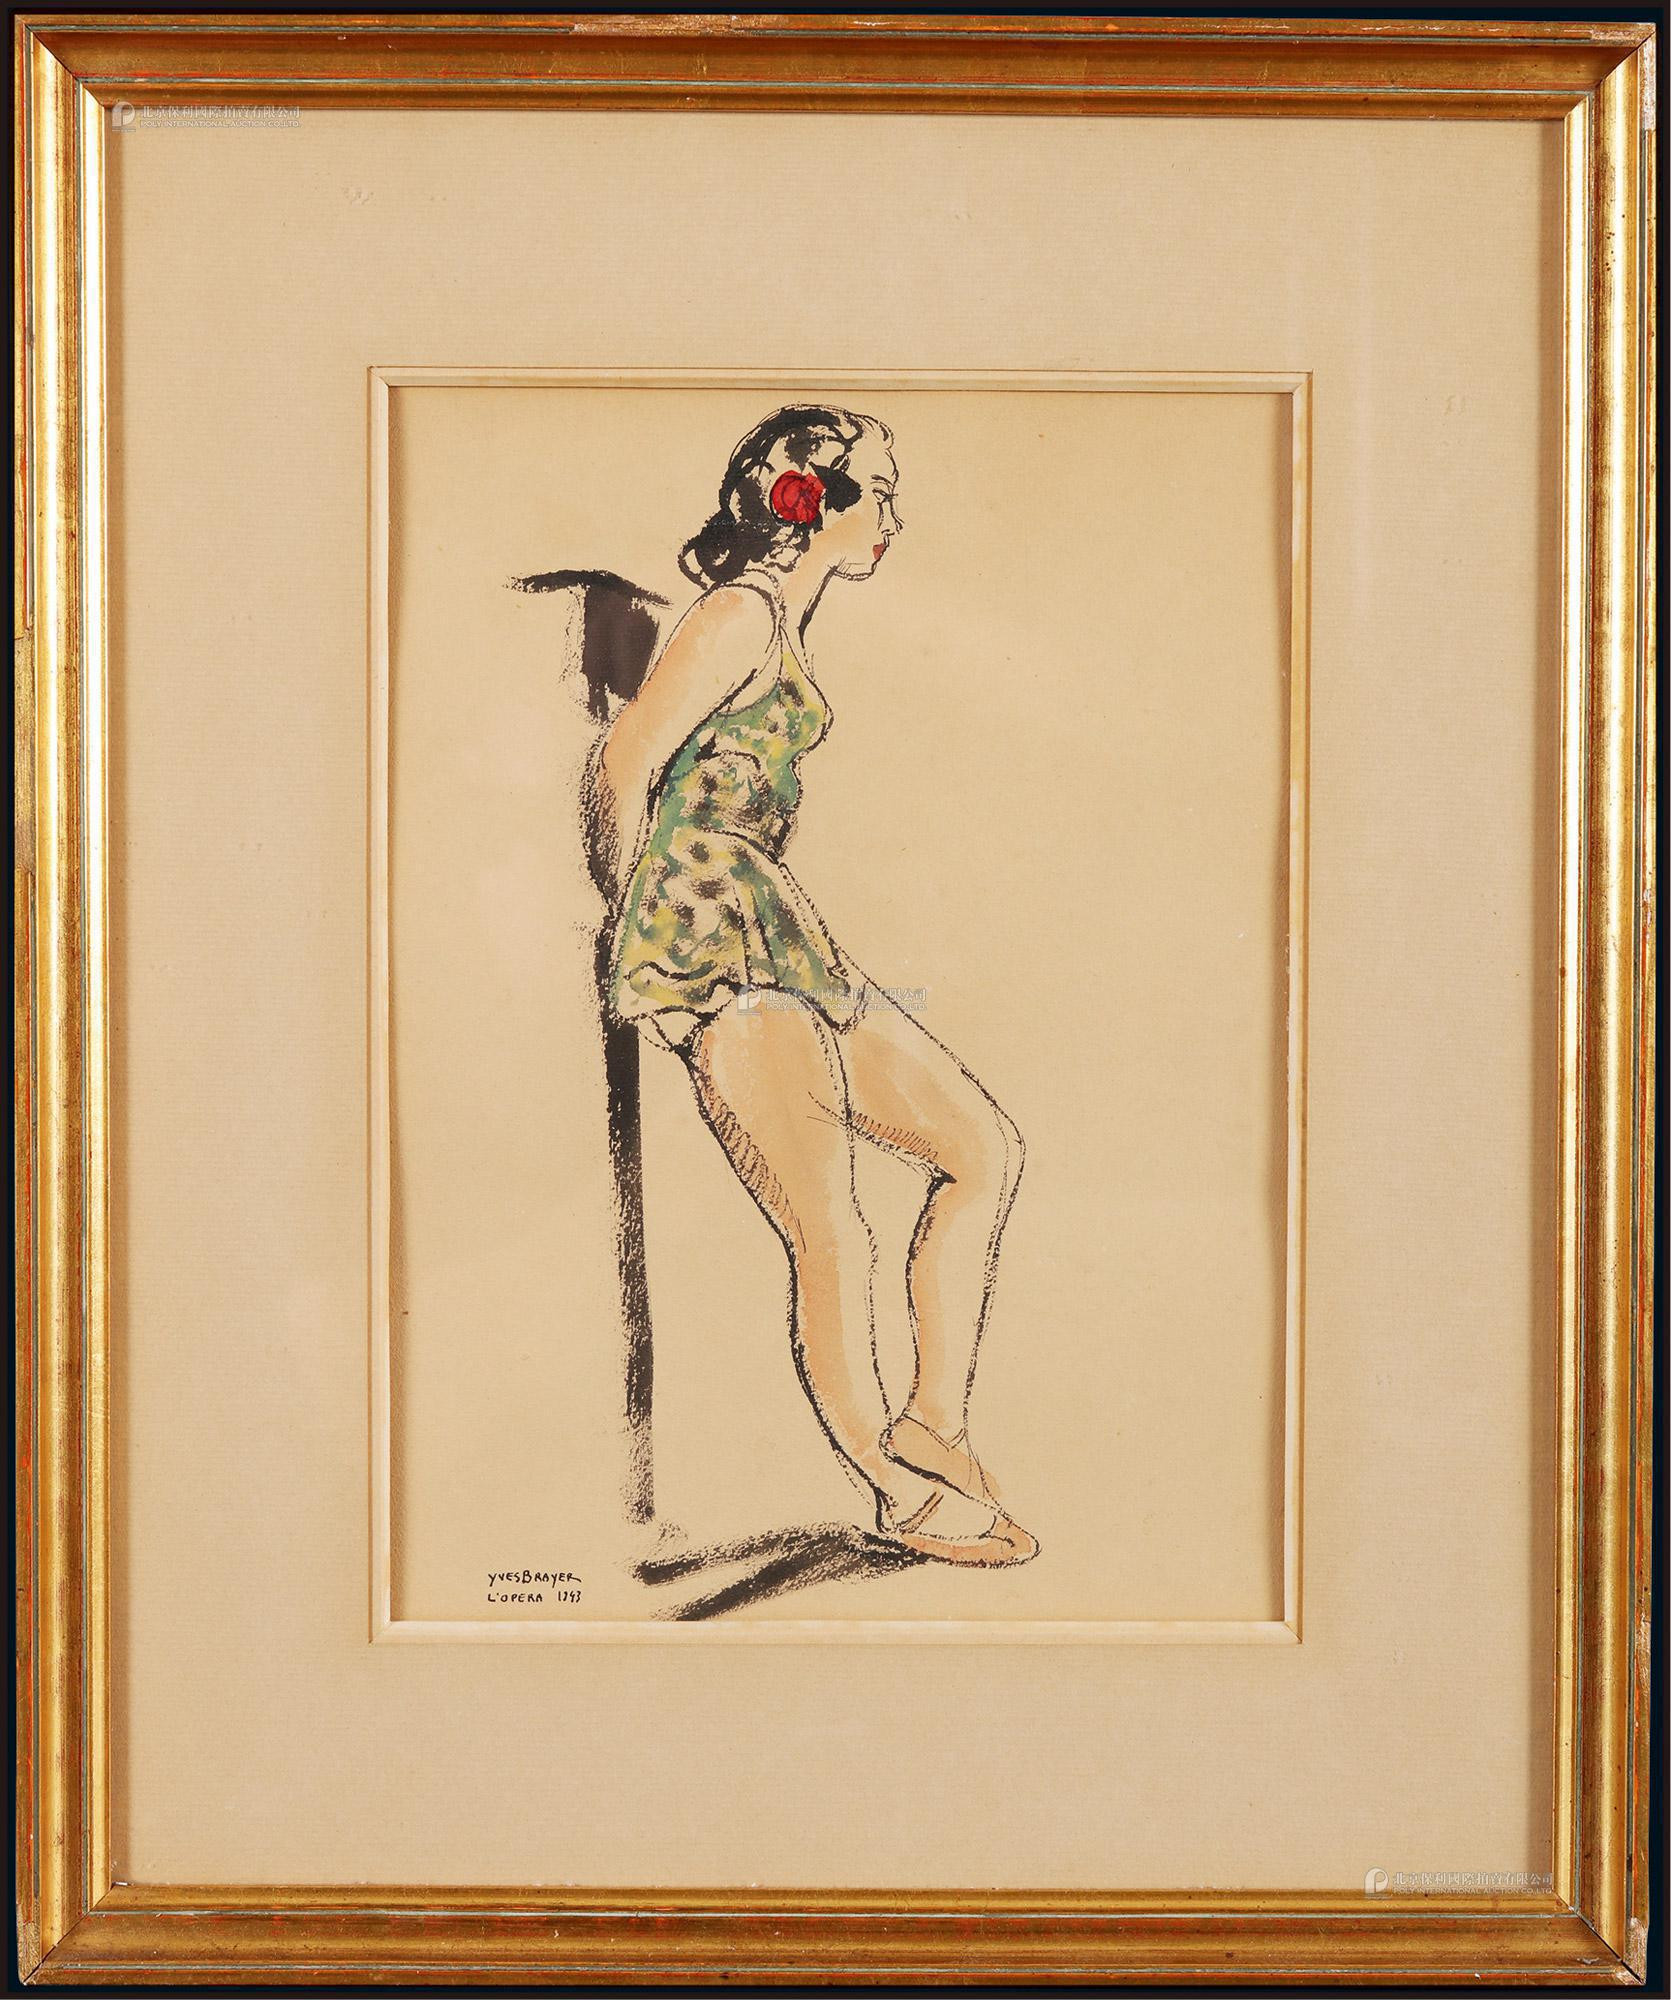 The watercolor painting “Ballet Dancer” by Yves Brayer, Liu Ziming’s mentor and famous French painter, with certificate